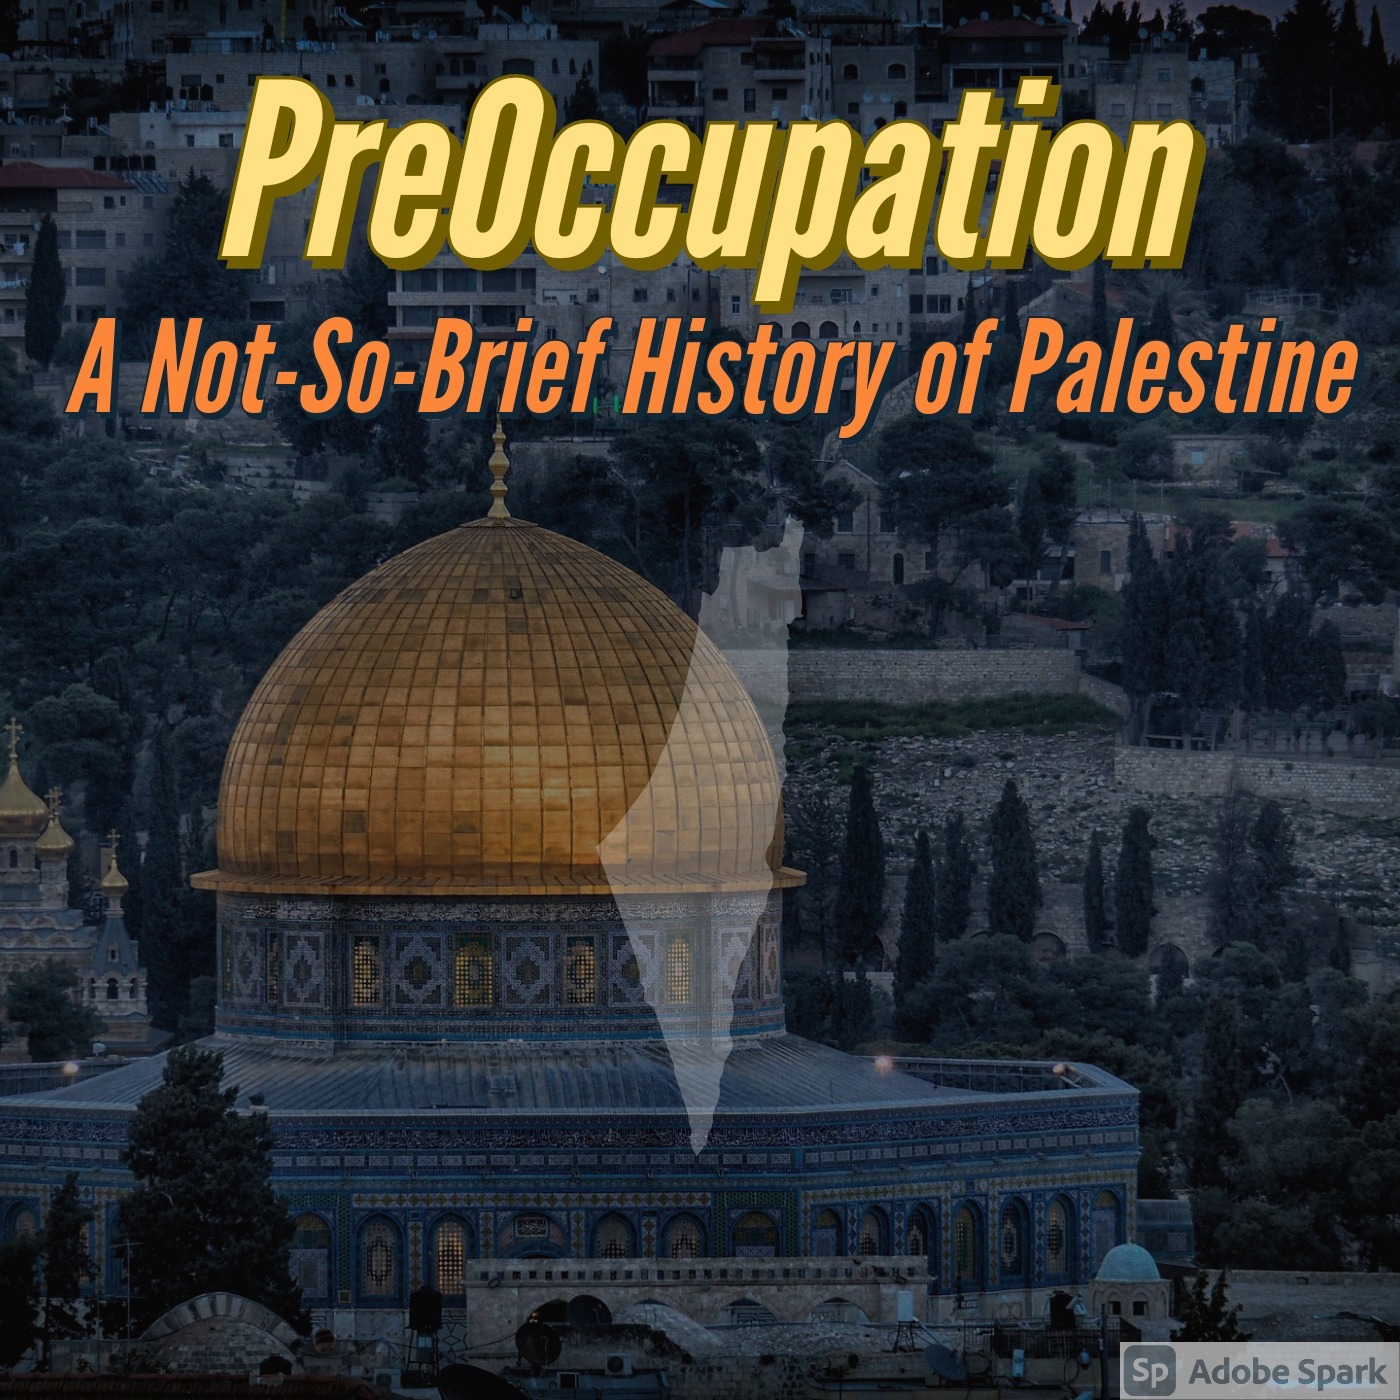 PreOccupation: A Not-So-Brief History of Palestine